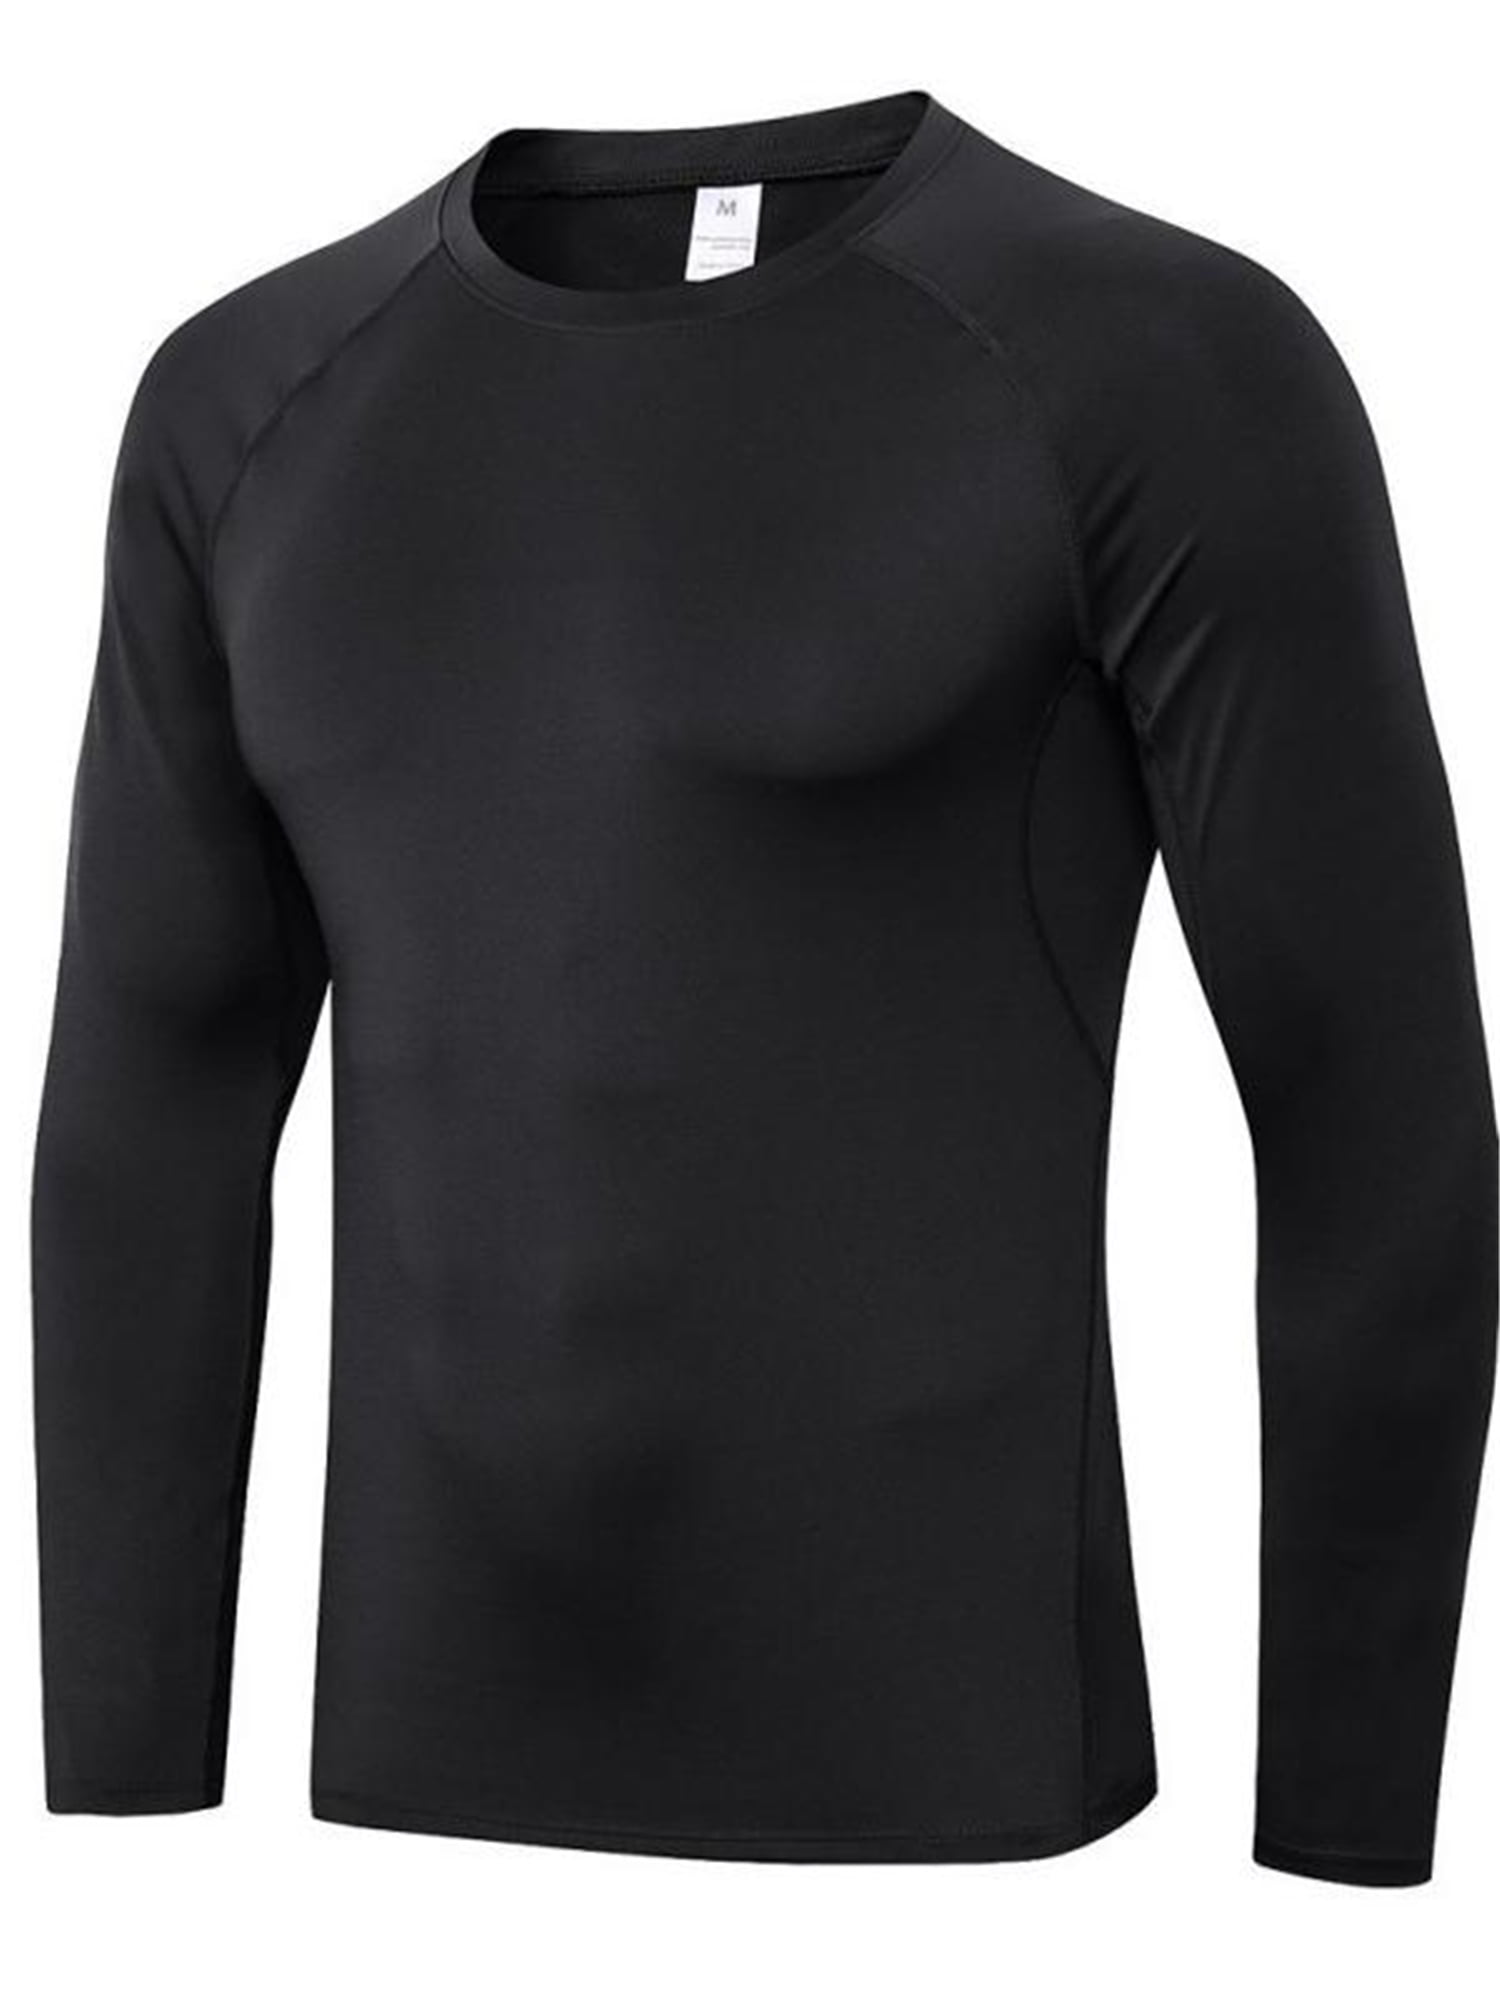 Topwoner Men's Long Sleeve Workout Shirts Quick-Drying Active Sports ...